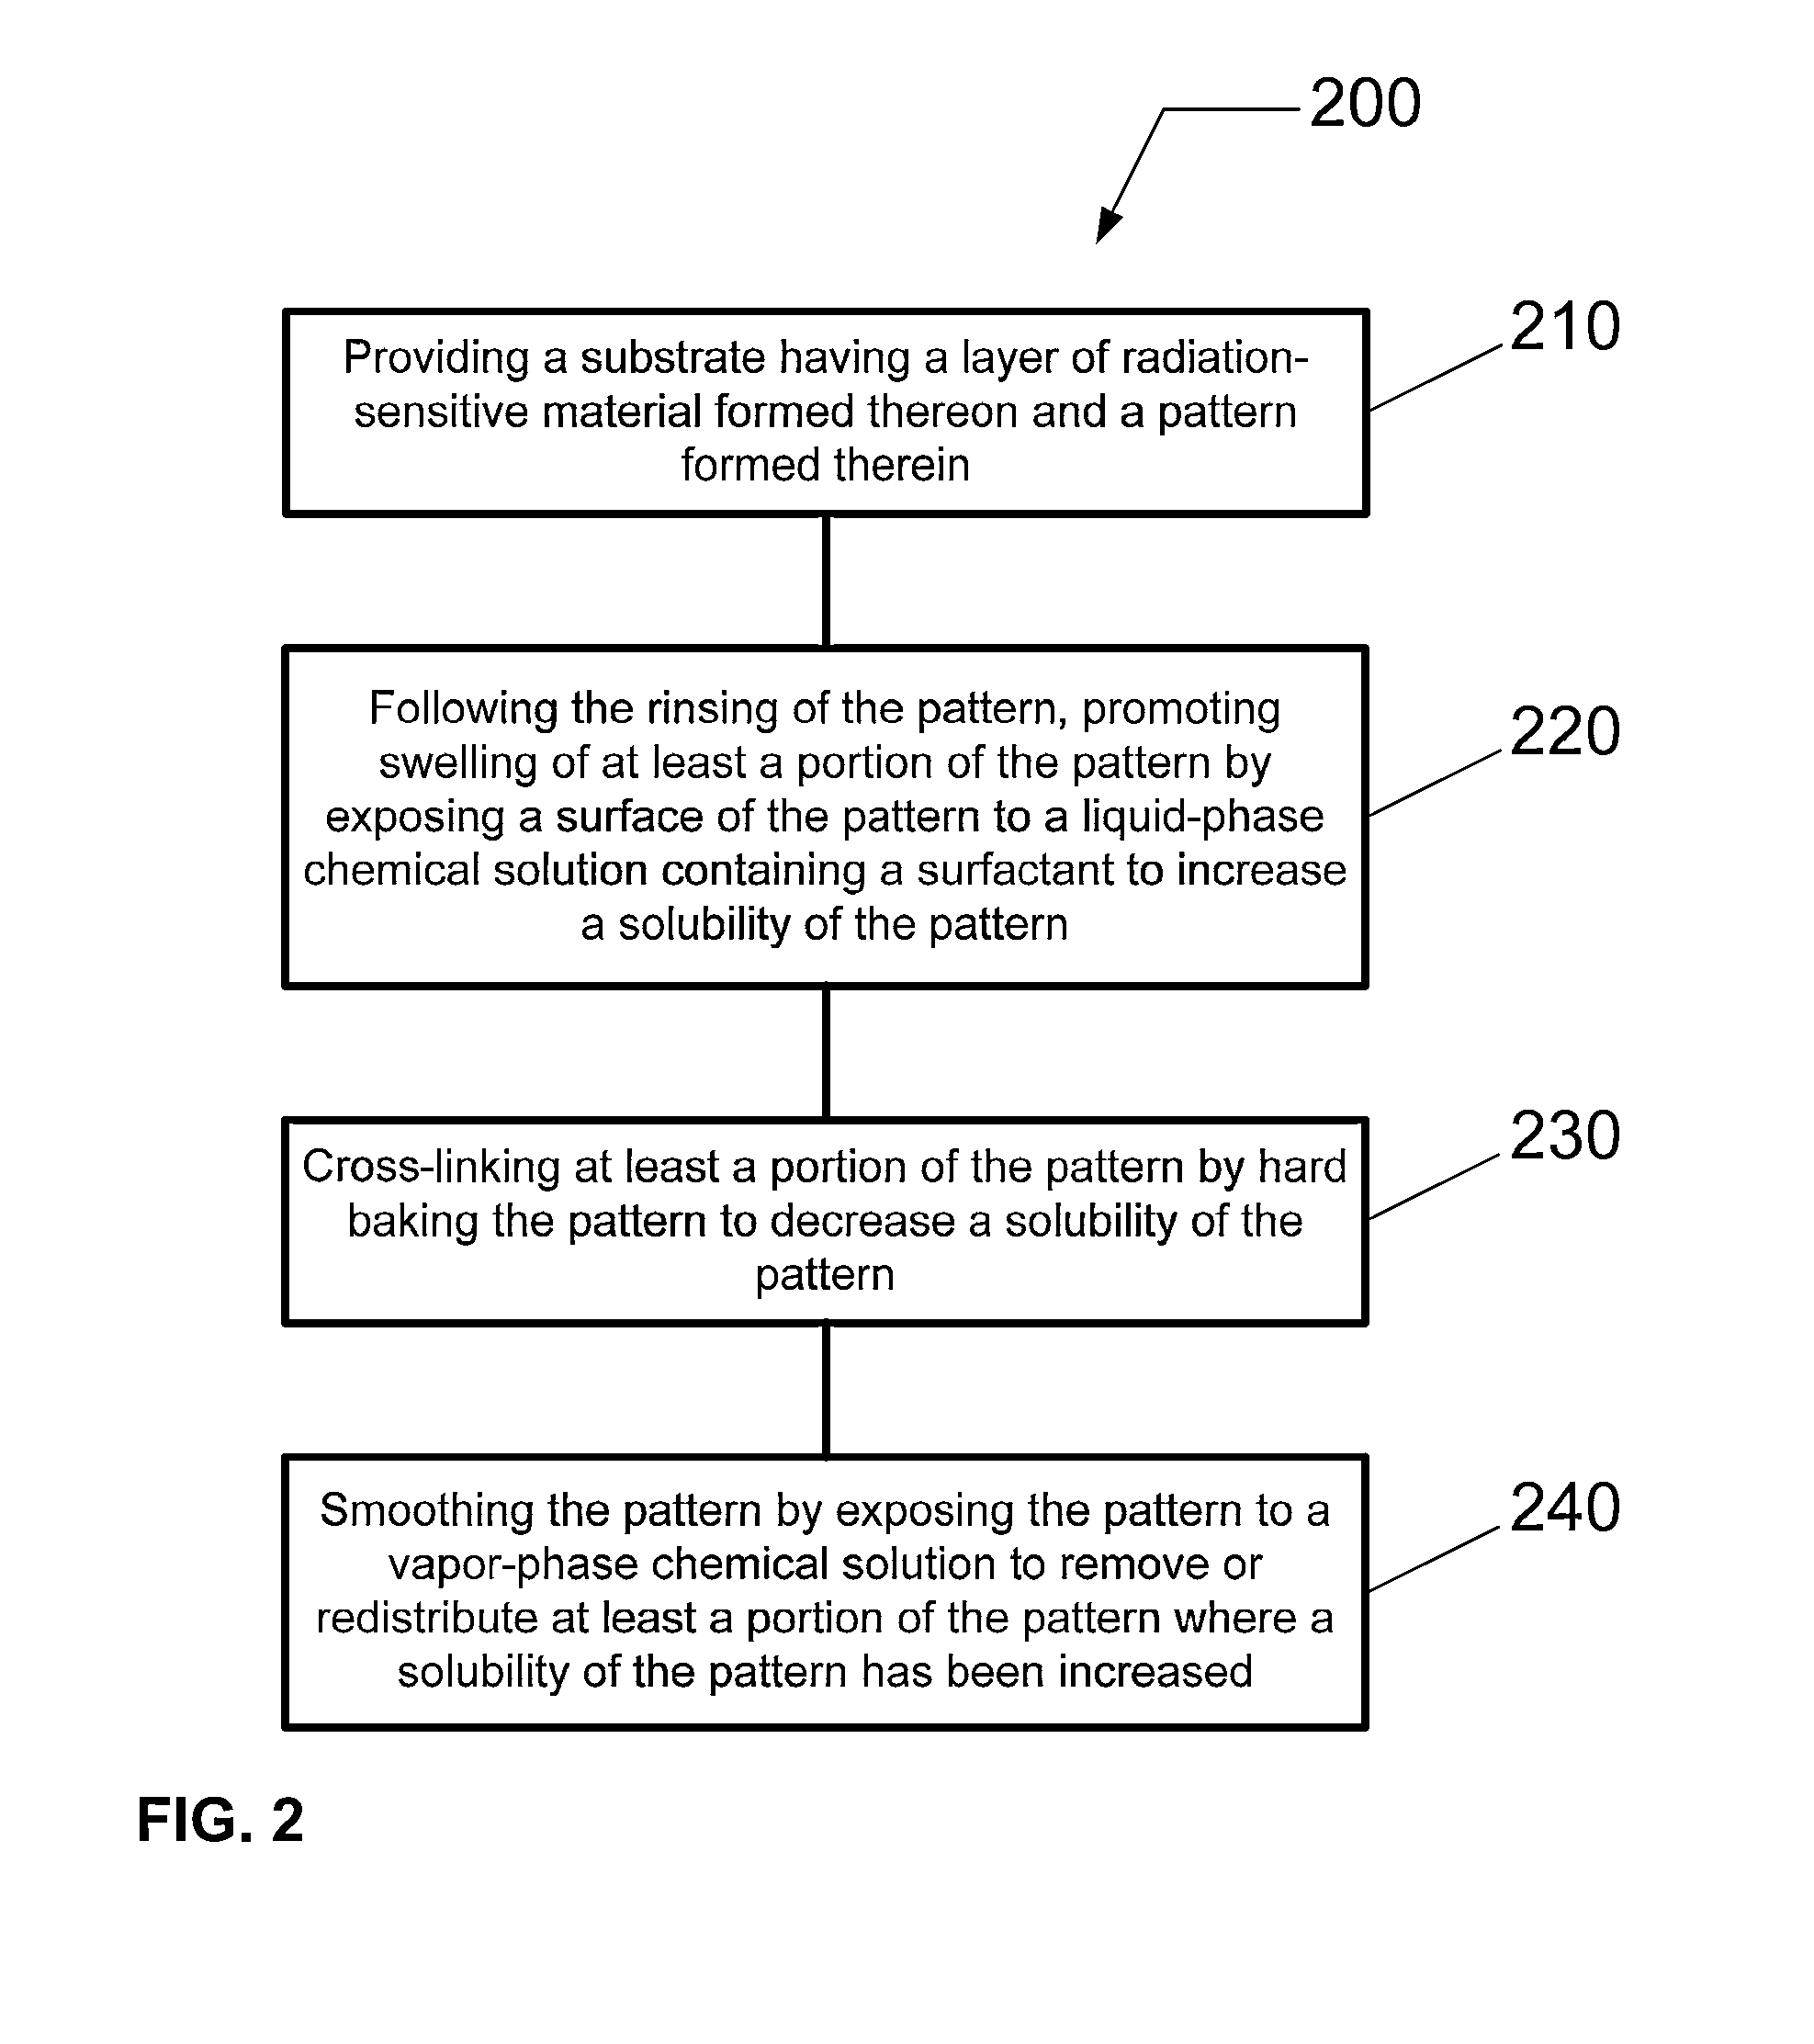 Process sequence for reducing pattern roughness and deformity